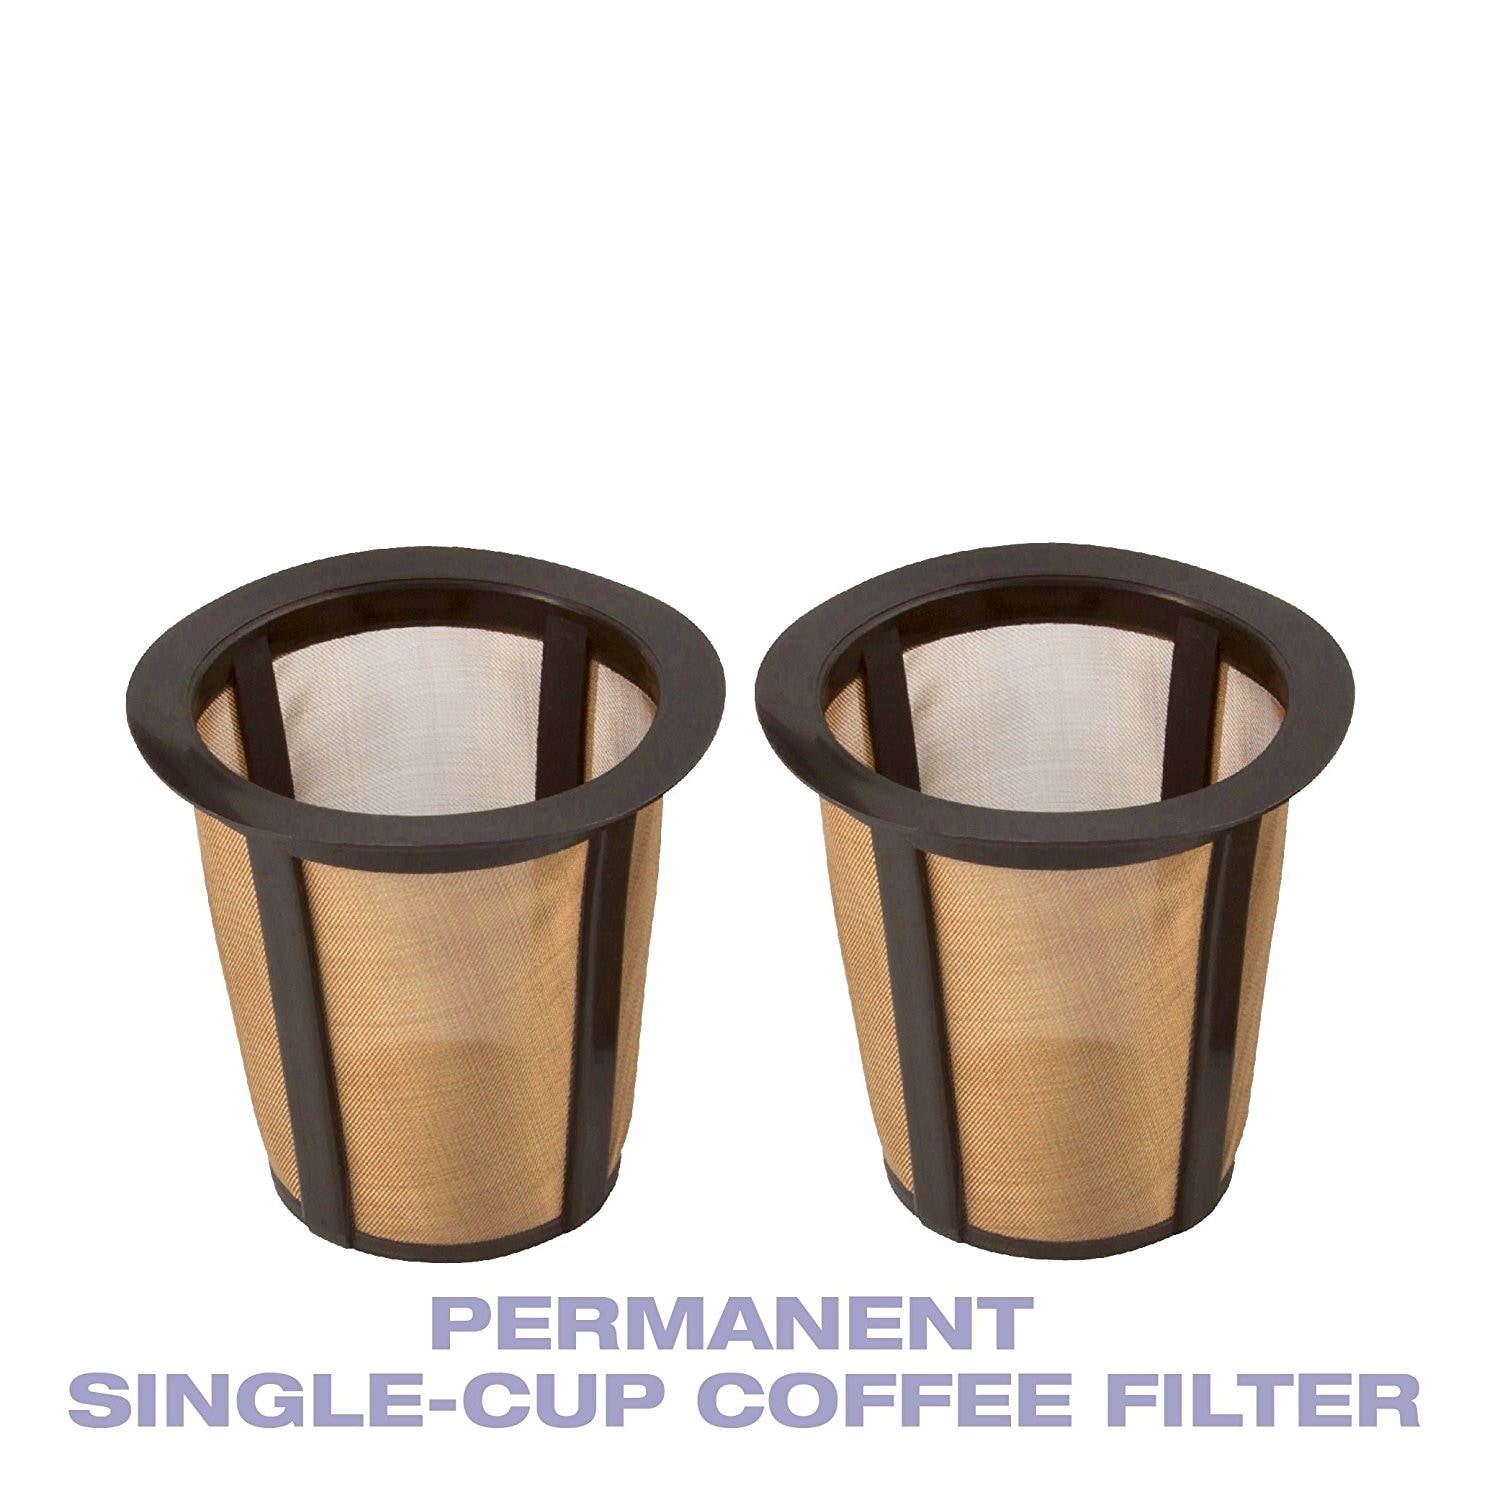 Details about   SOLOFILL GOLD MESH FILTER BREWERS FIT KEURIG 2 & 1 REFILLABLE SINGLE CUP COFFEE 